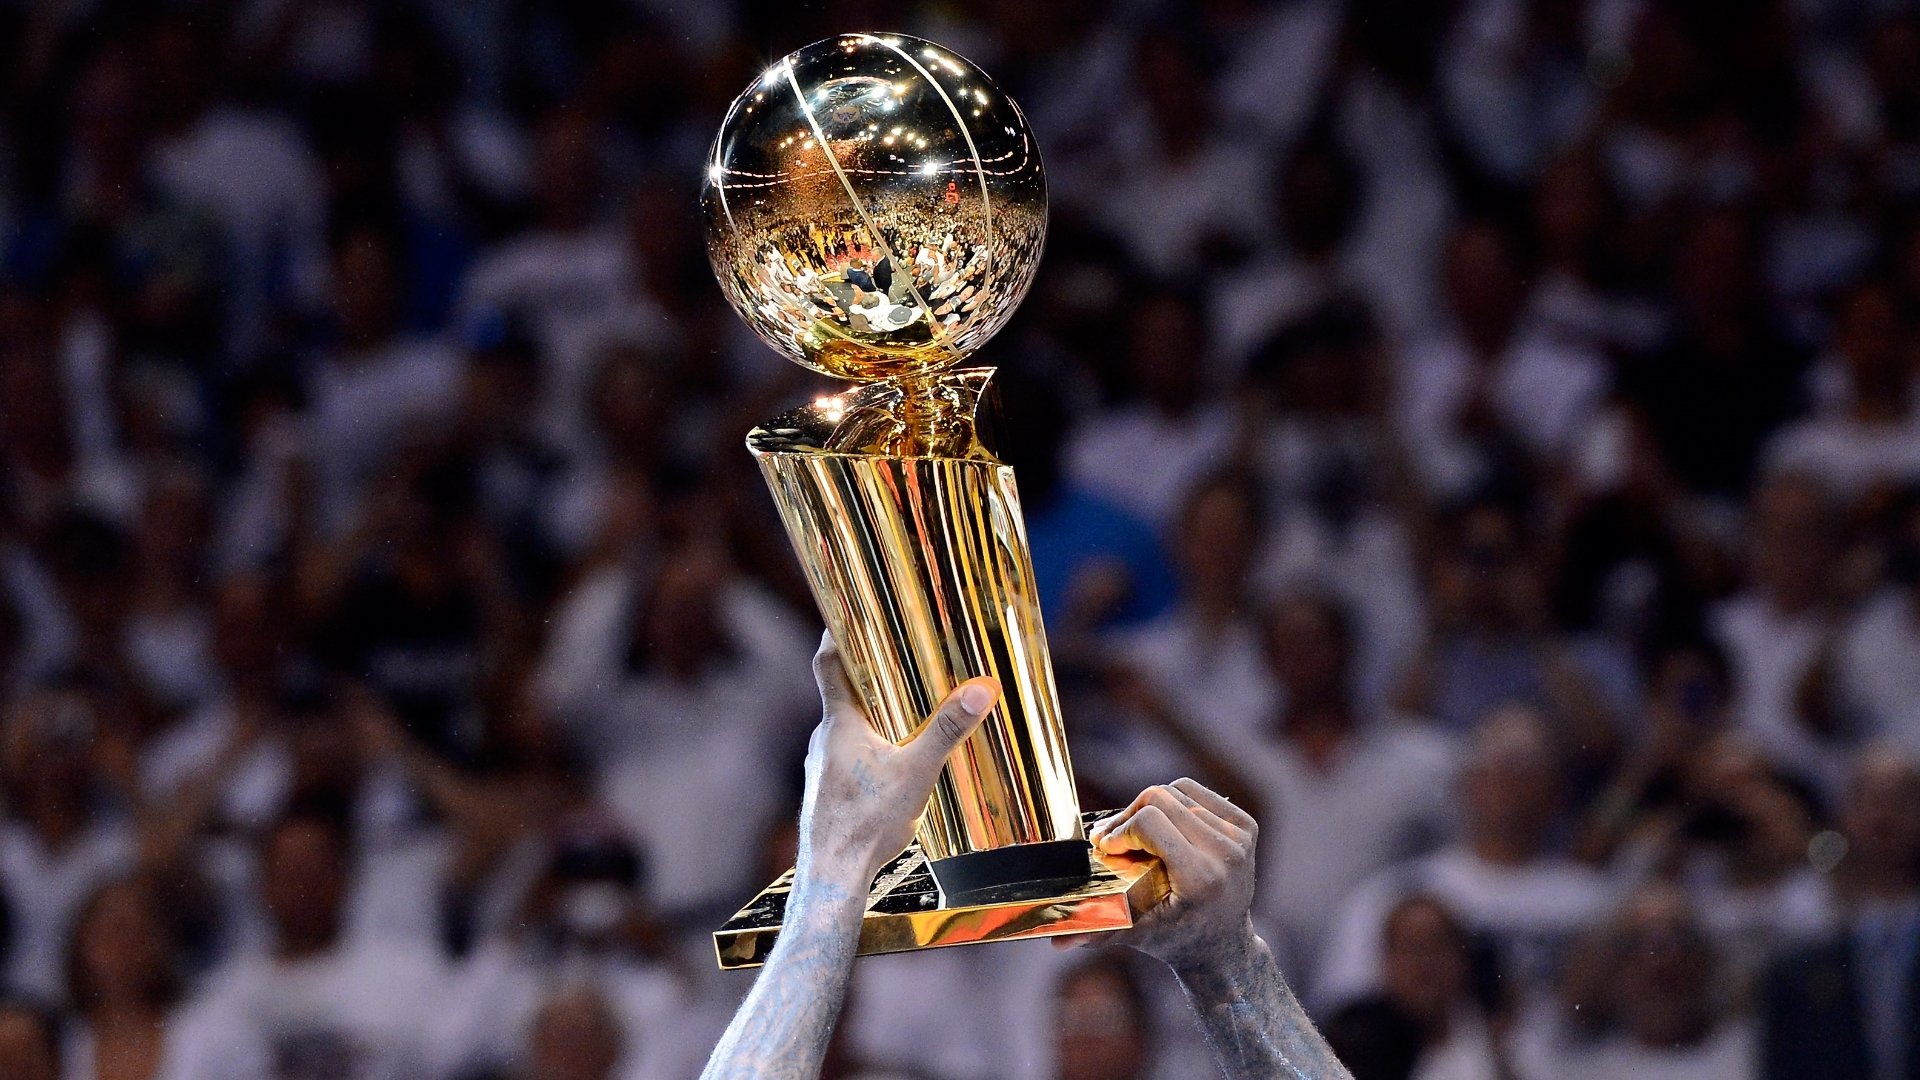 NBA Playoffs: How do the defending NBA Champions perform in the postseason?. NBA.com Australia. The official site of